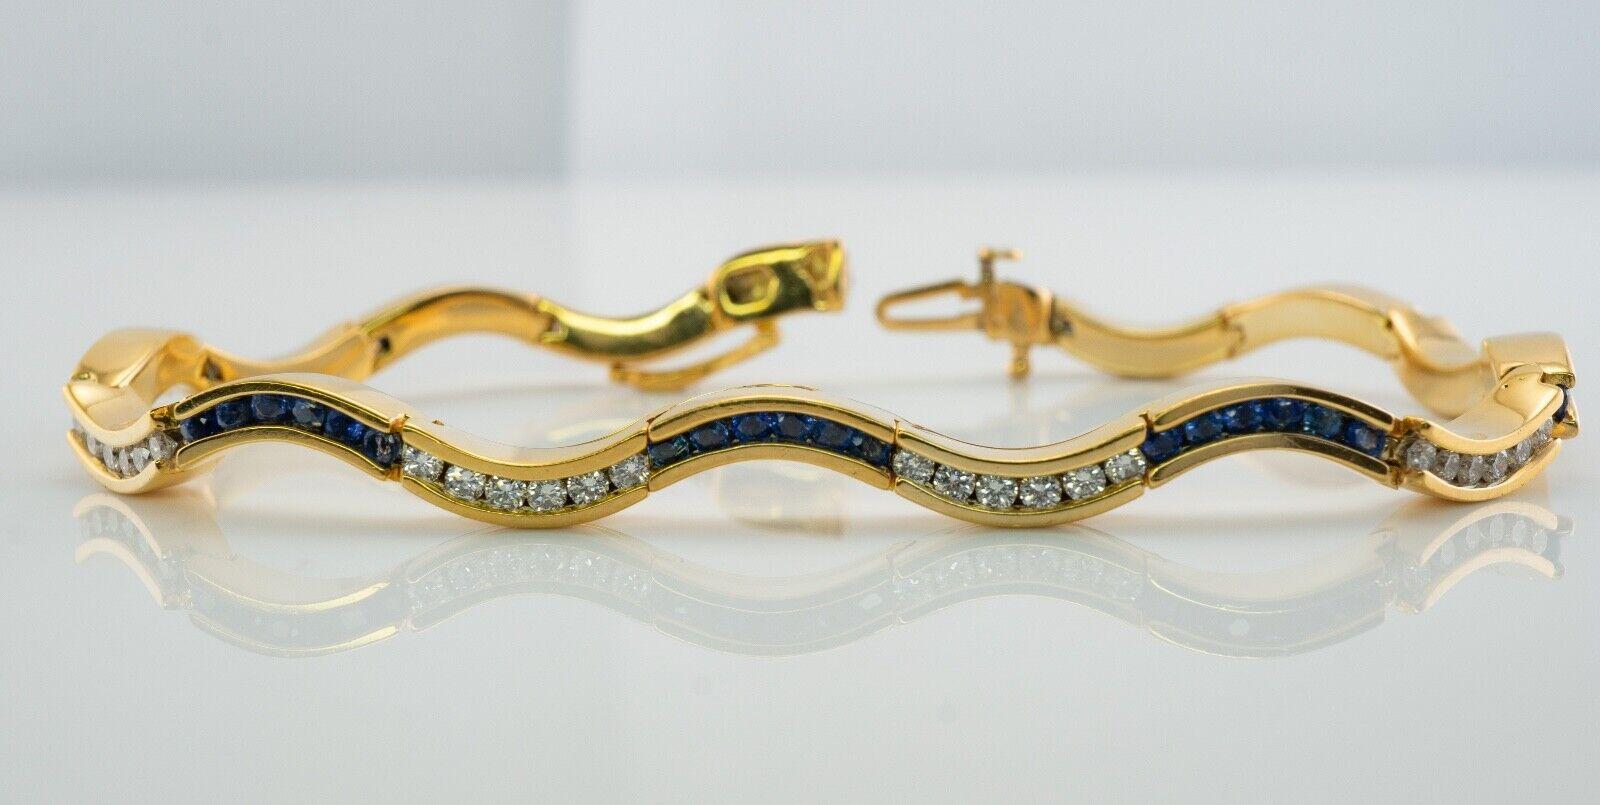 Diamond Sapphire Bracelet 14K Gold Wave Curvy

This terrific sapphire diamond bracelet is crafted in solid 14K Yellow Gold. There are 8 links with genuine Earth mined blue sapphires and 8 links with diamonds. Each intense blue sapphire measures 1mm